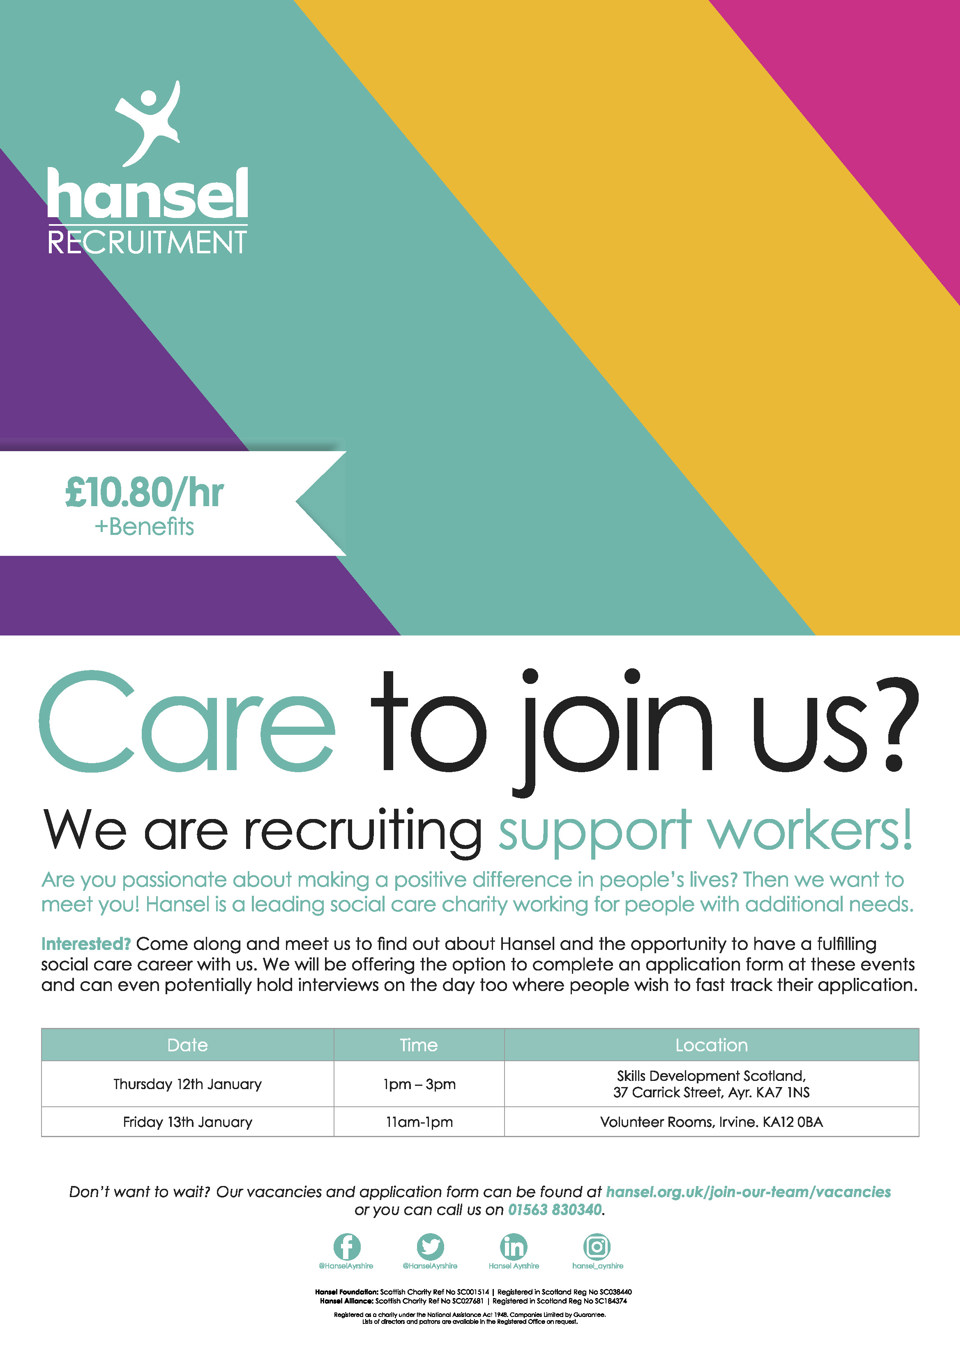 Find out more about working at Hansel at our January recruitment events 